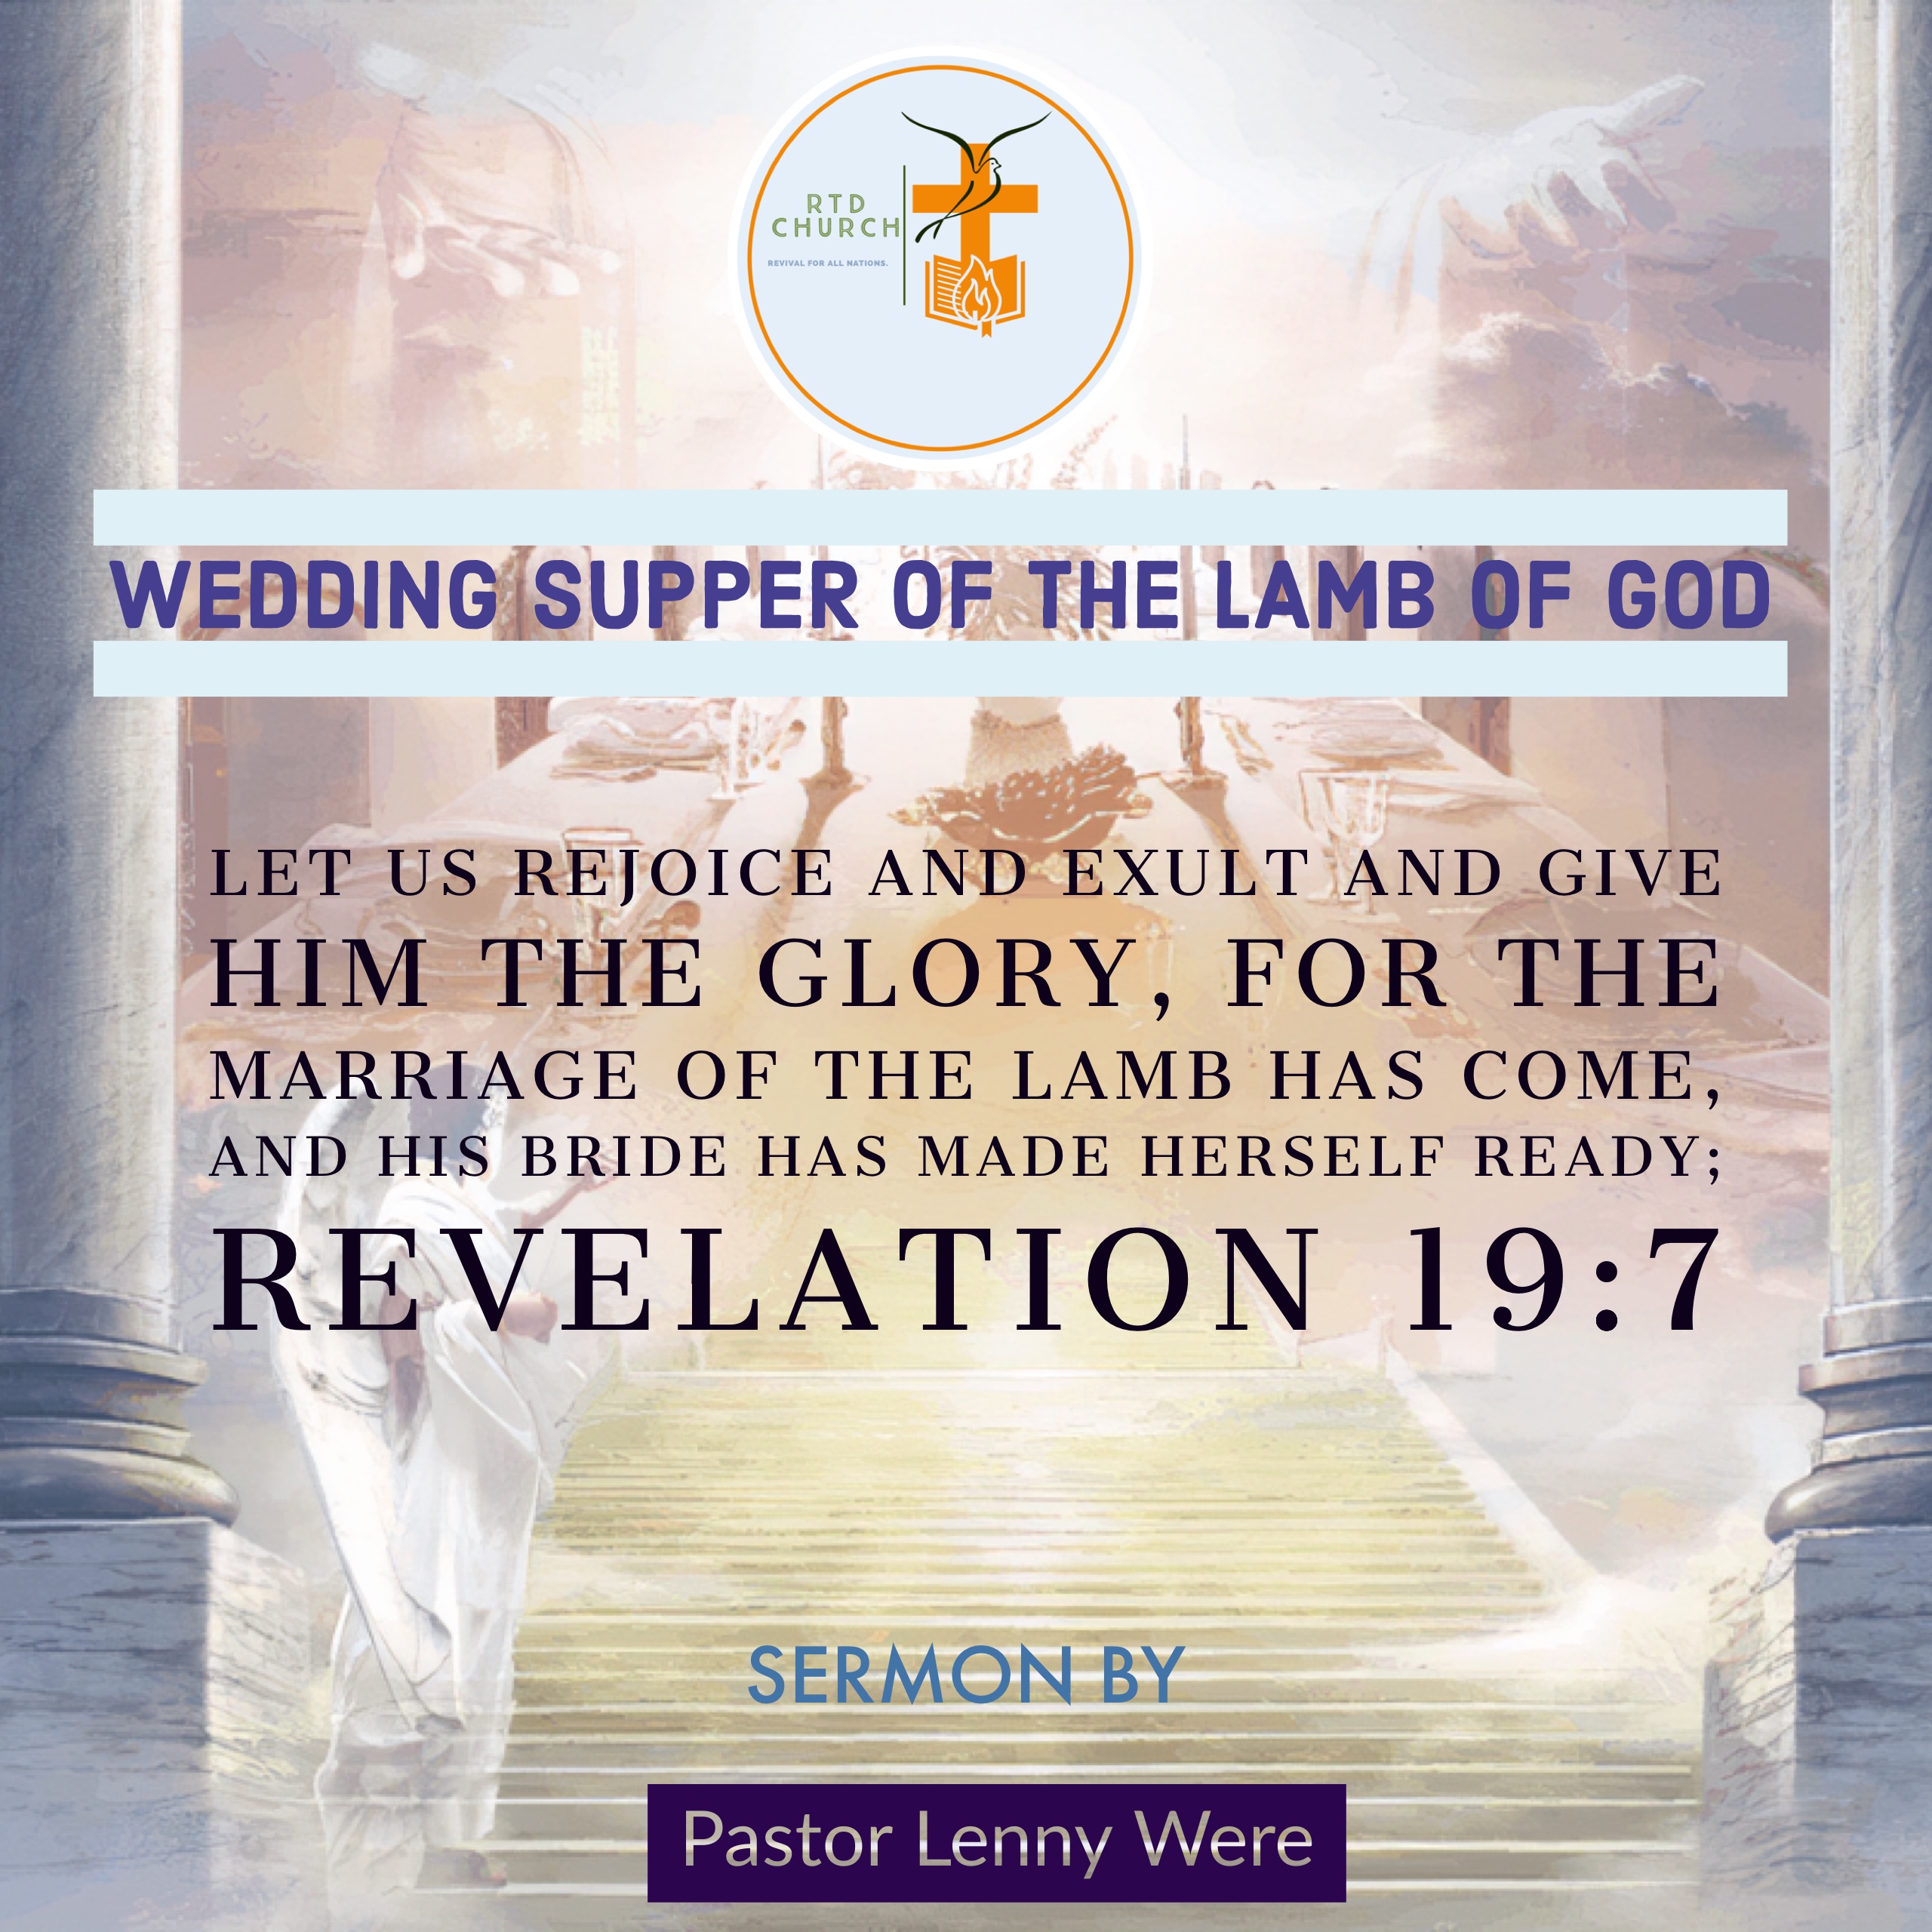 The Wedding Supper of the Lamb of God